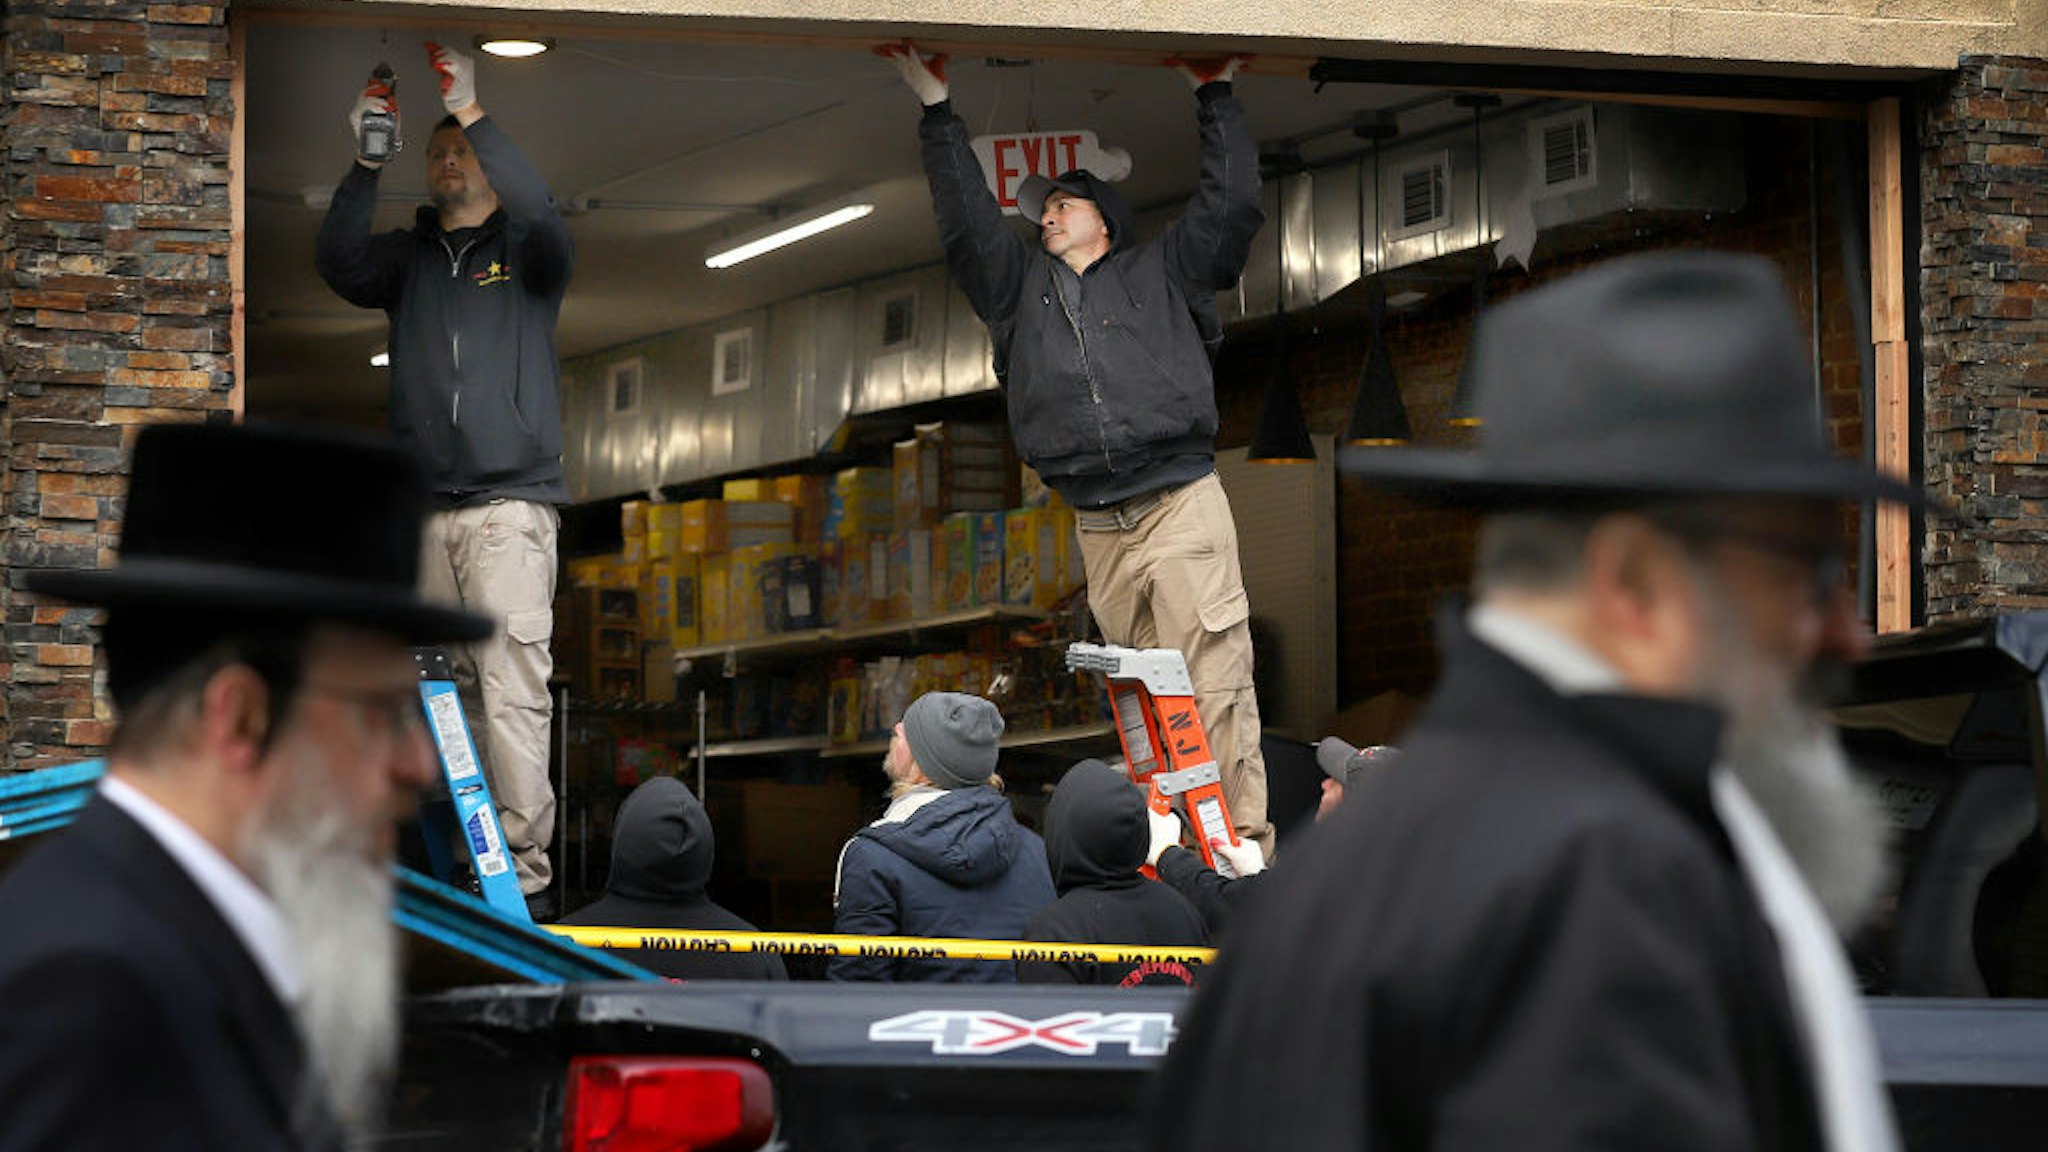 JERSEY CITY, NJ - DECEMBER 11: Recovery and clean up crews work the scene in the aftermath of a mass shooting at the JC Kosher Supermarket on December 11, 2019 in Jersey City, New Jersey. Six people, including a Jersey City police officer and three civilians were killed in a deadly, hours-long gun battle between two armed suspects and police on Tuesday in a standoff and shootout in a Jewish market that appears to have been targeted, according to Jersey City Mayor Steven Fulop.